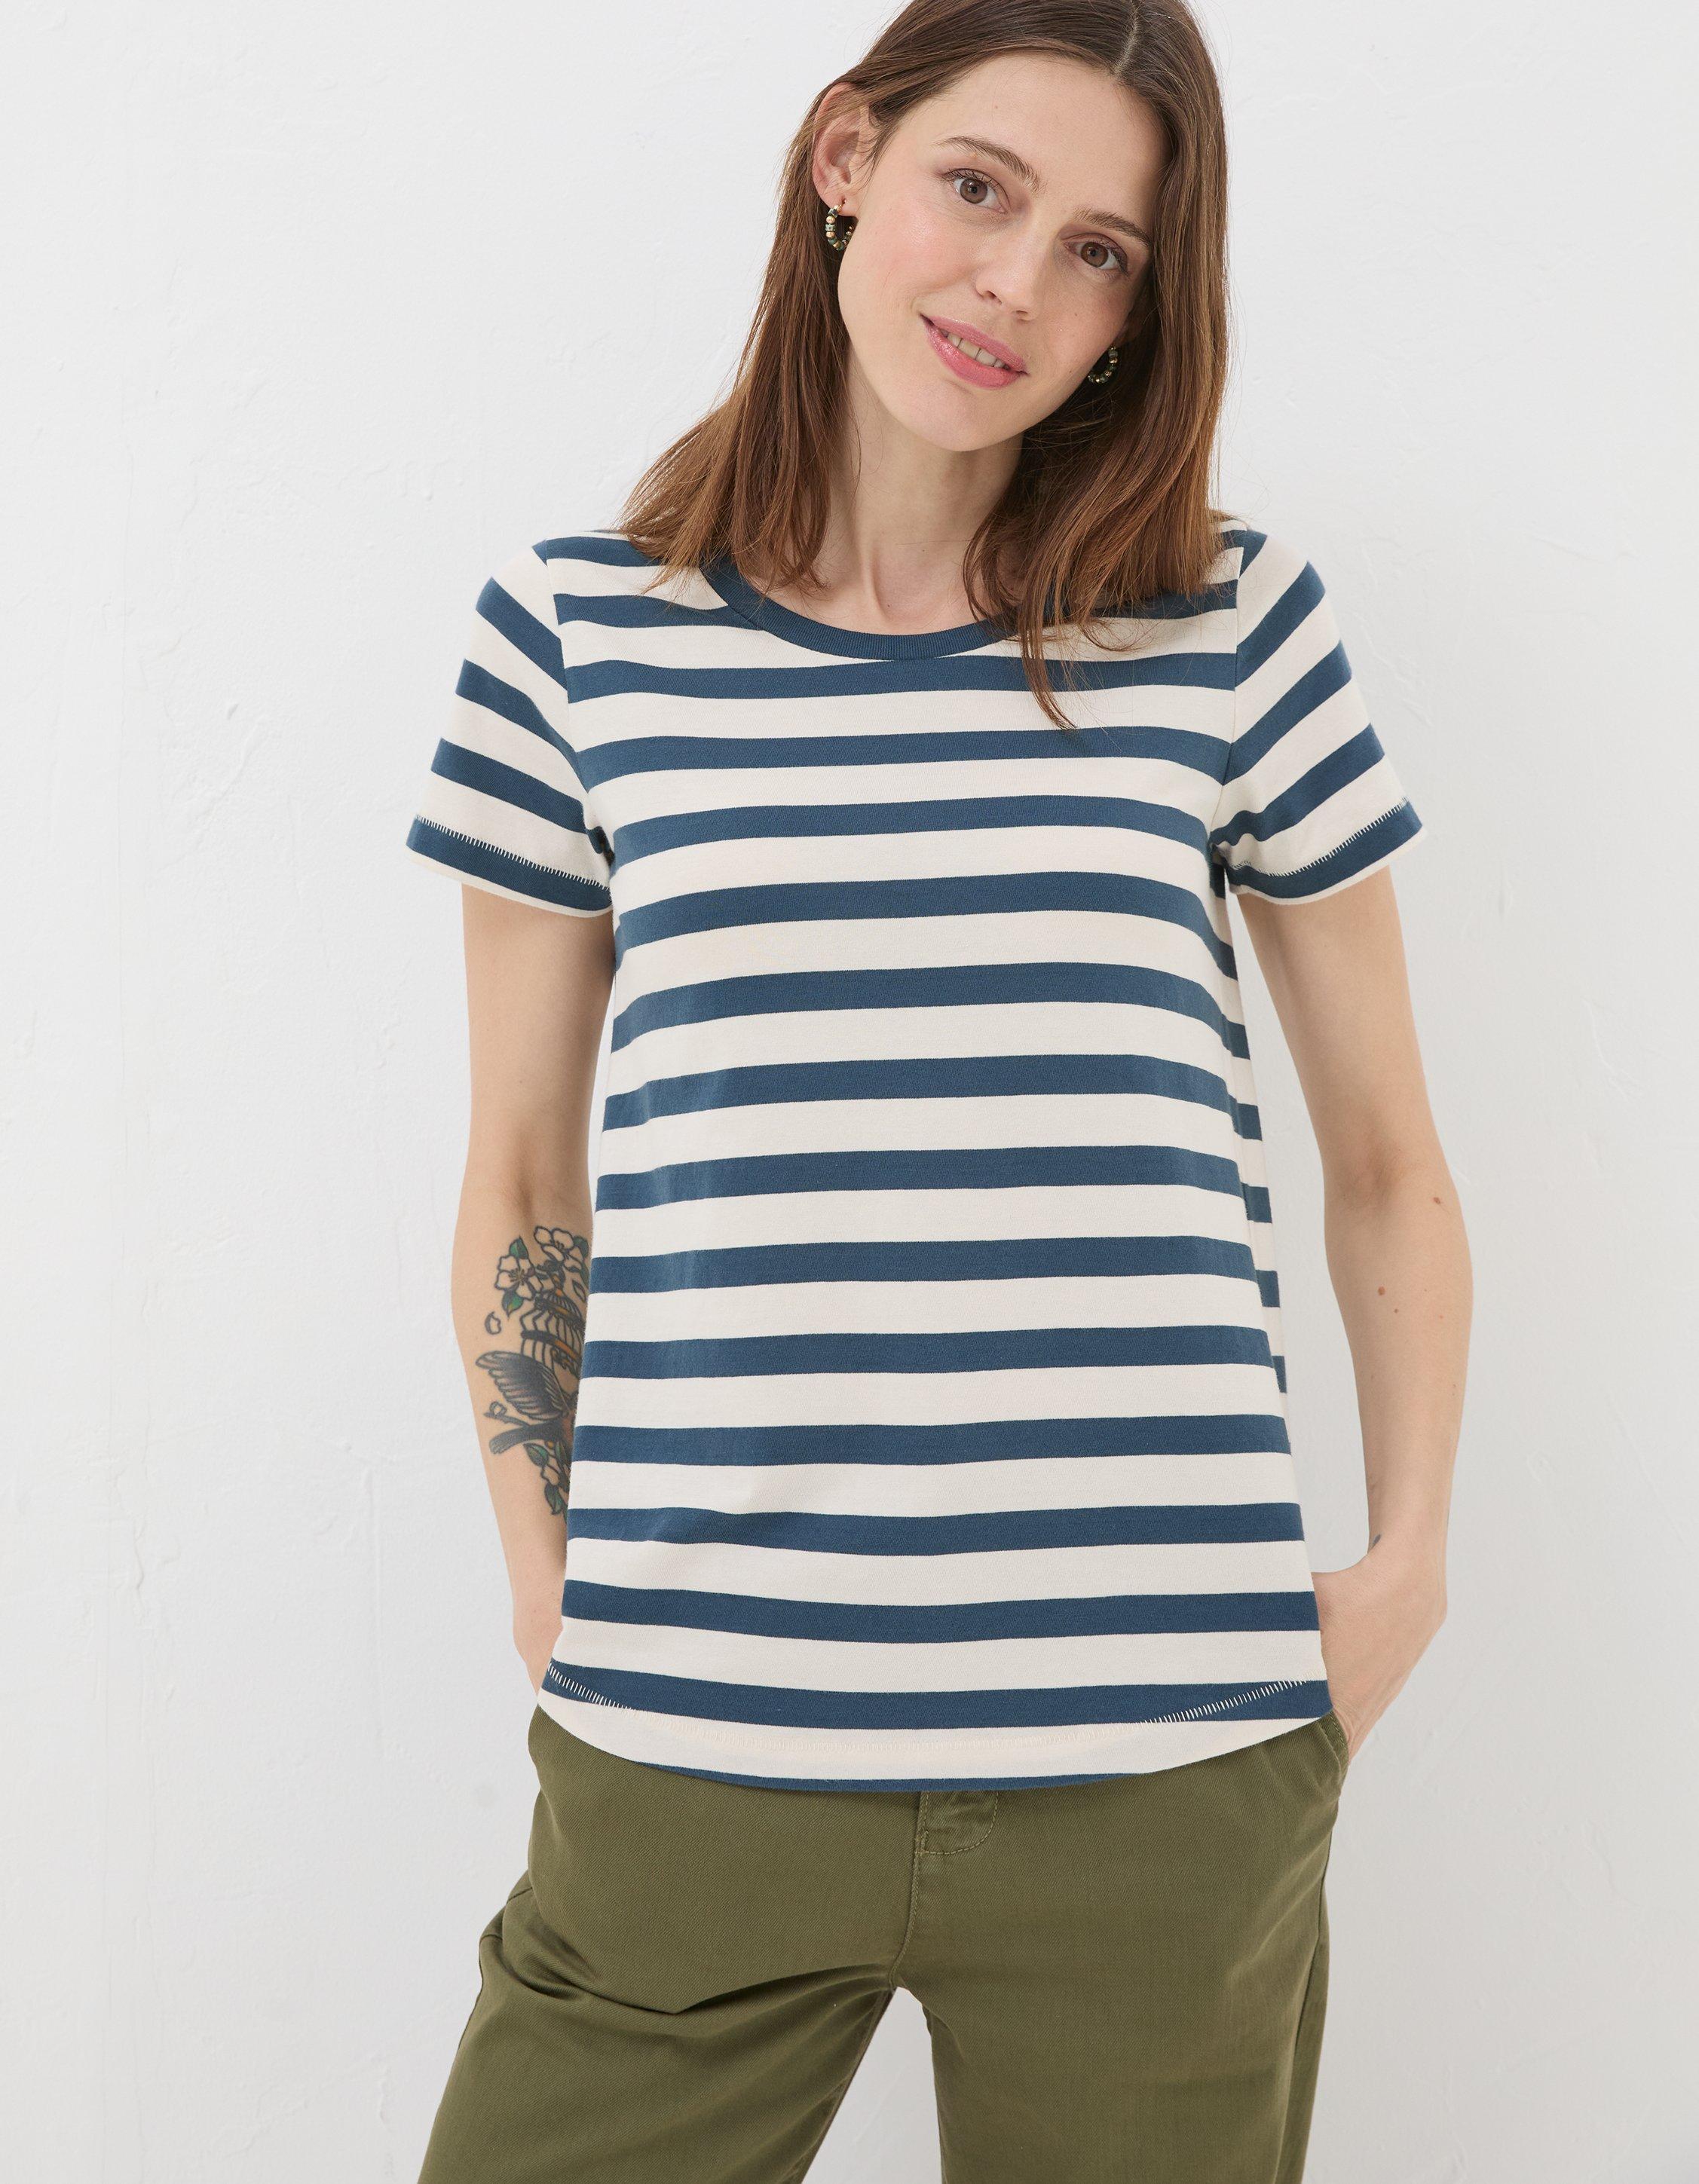 Women's Tops & T-Shirts, Plain and Printed